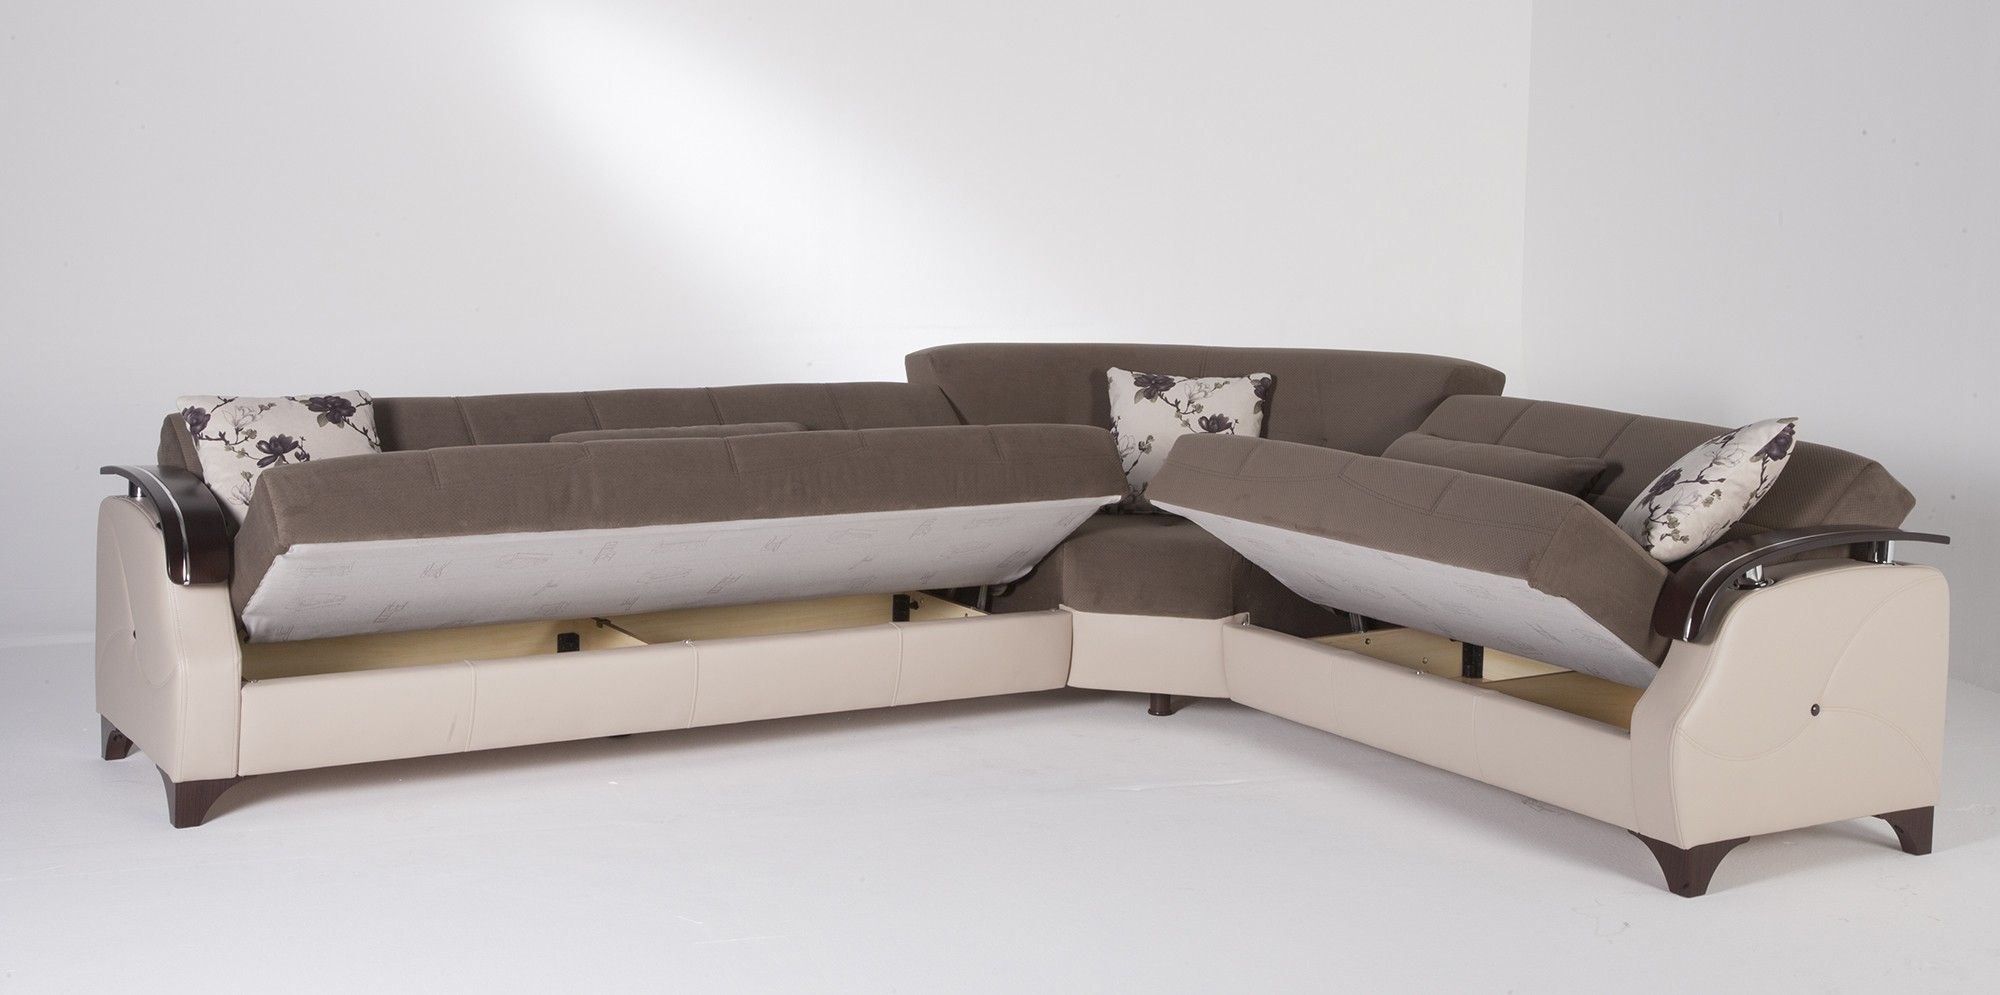 Sectional Sofa Design: Cheap Sectional Sofas Furniture Design Stock Intended For L Shaped Sectional Sleeper Sofas (Photo 8 of 10)